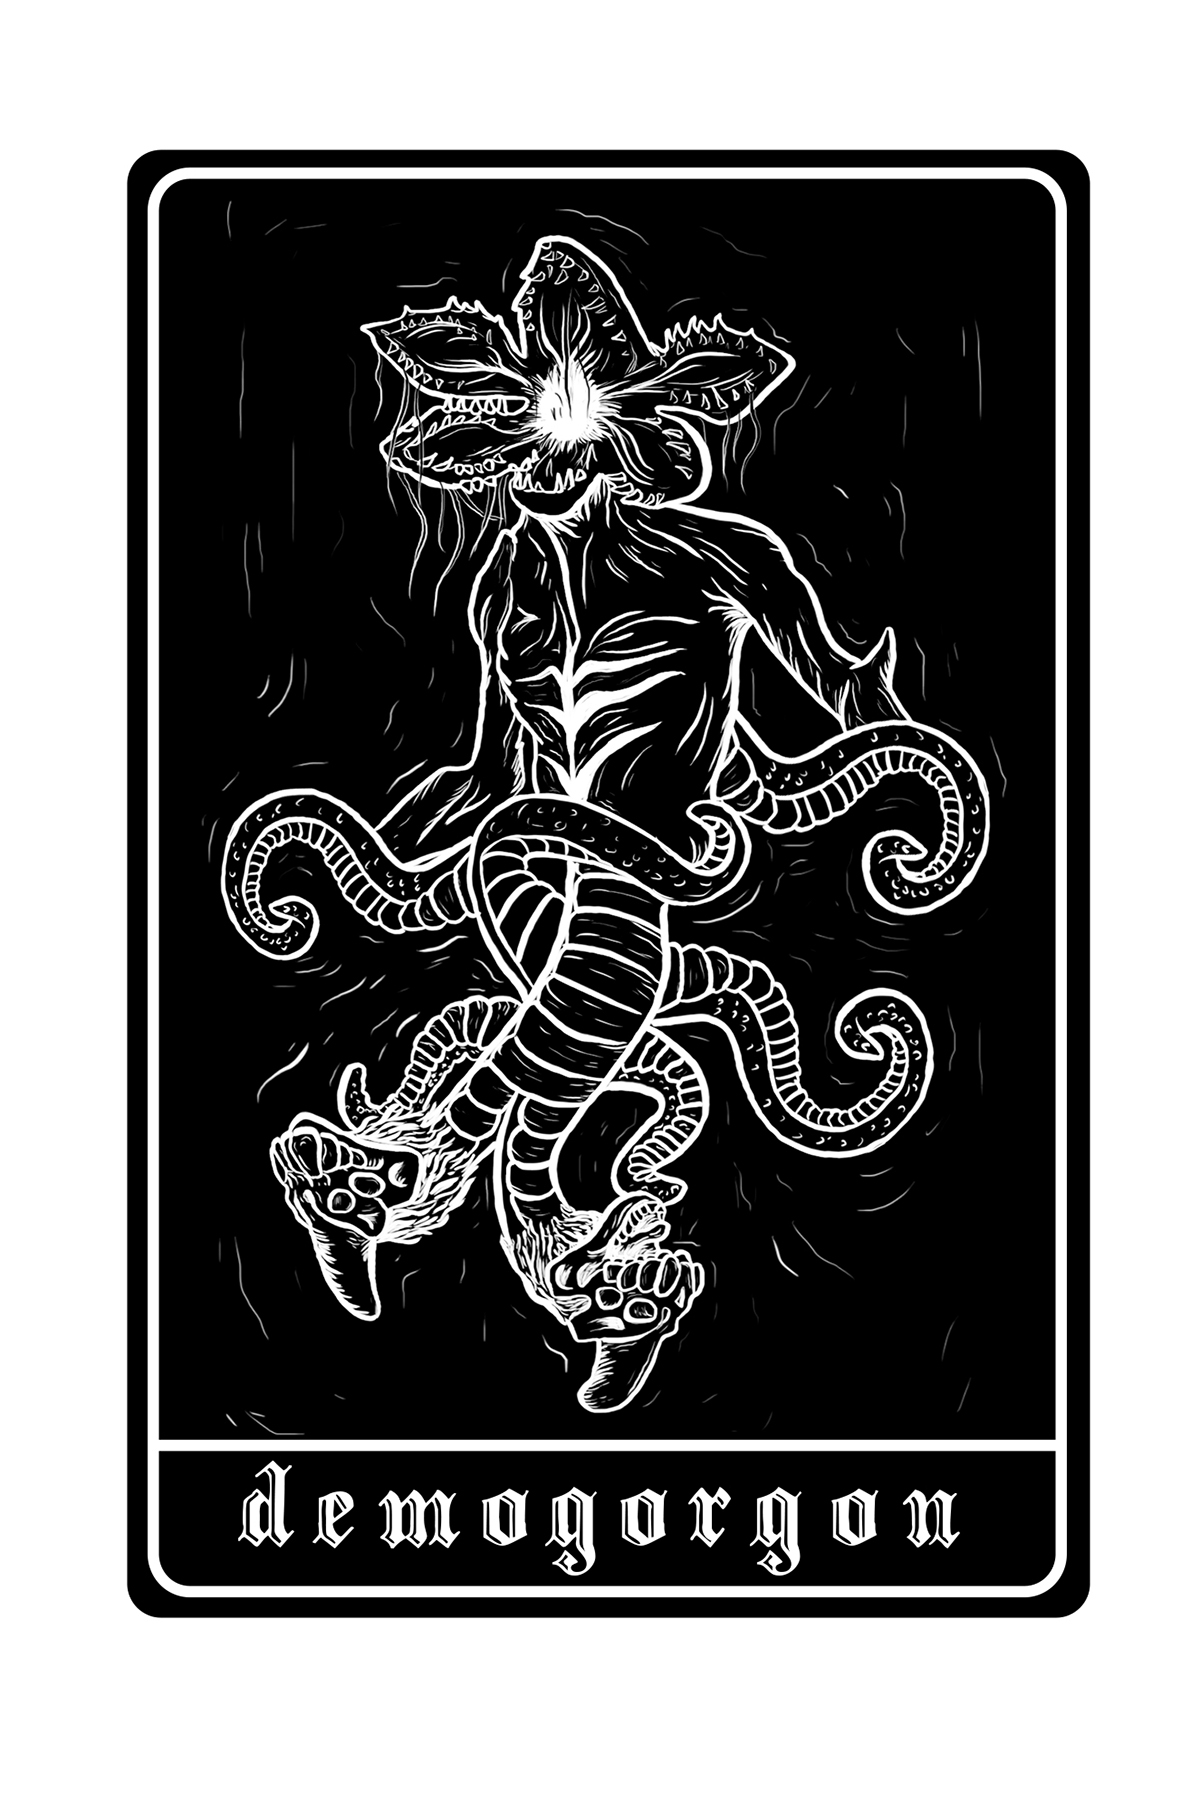 Stranger Things Fan Art black and white gothic ILLUSTRATION  draw Drawing  photoshop 80s Netflix monster Character card design print Style cool awesome